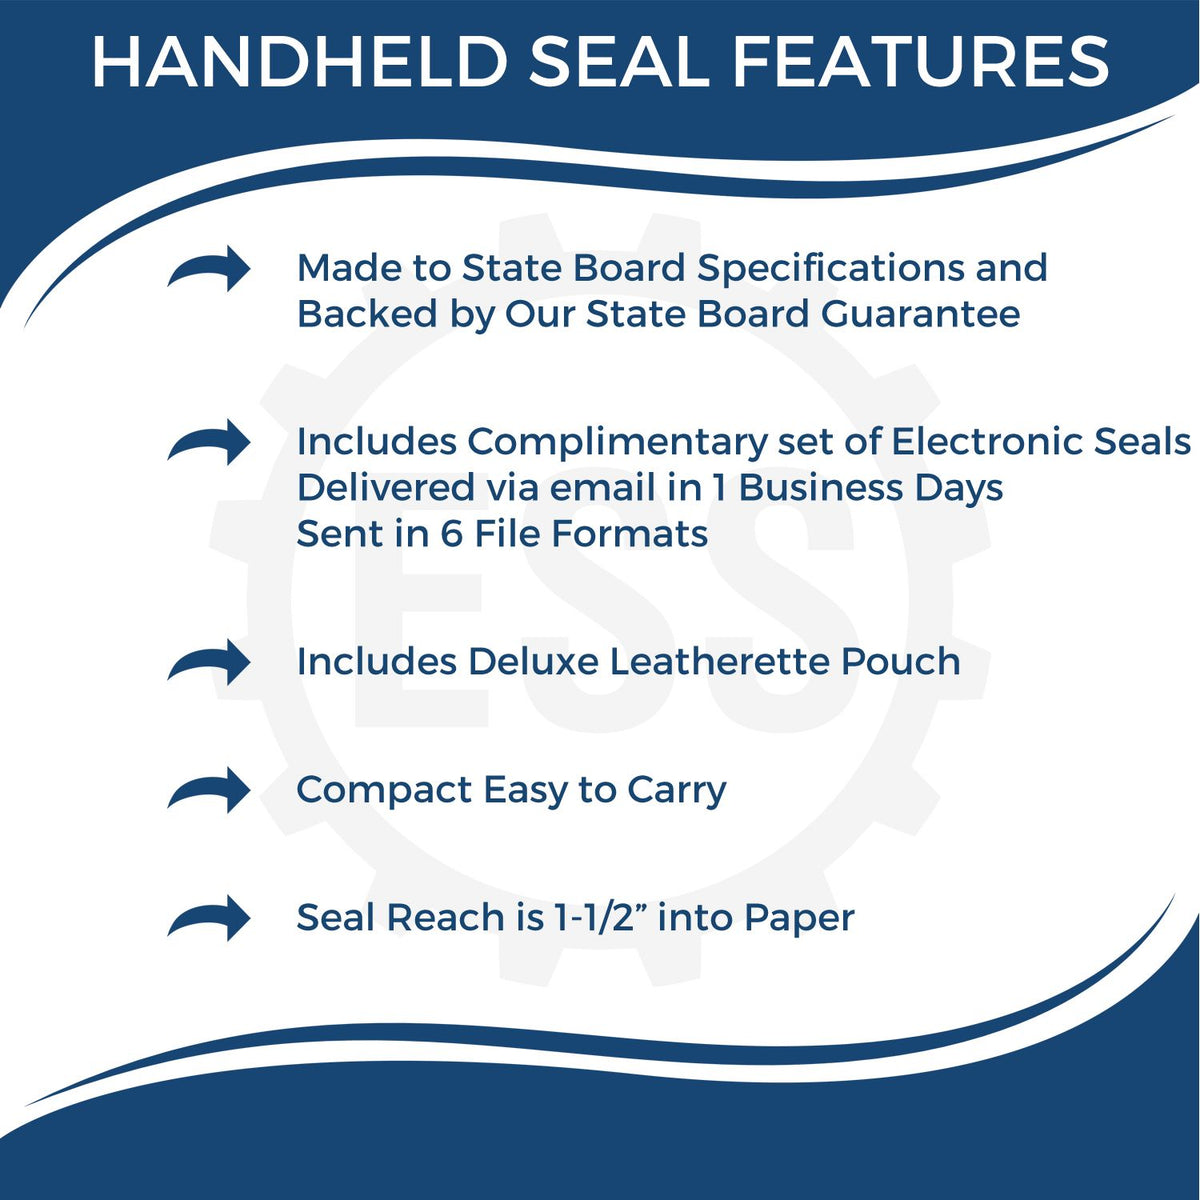 A picture of an infographic highlighting the selling points for the Handheld Kansas Land Surveyor Seal